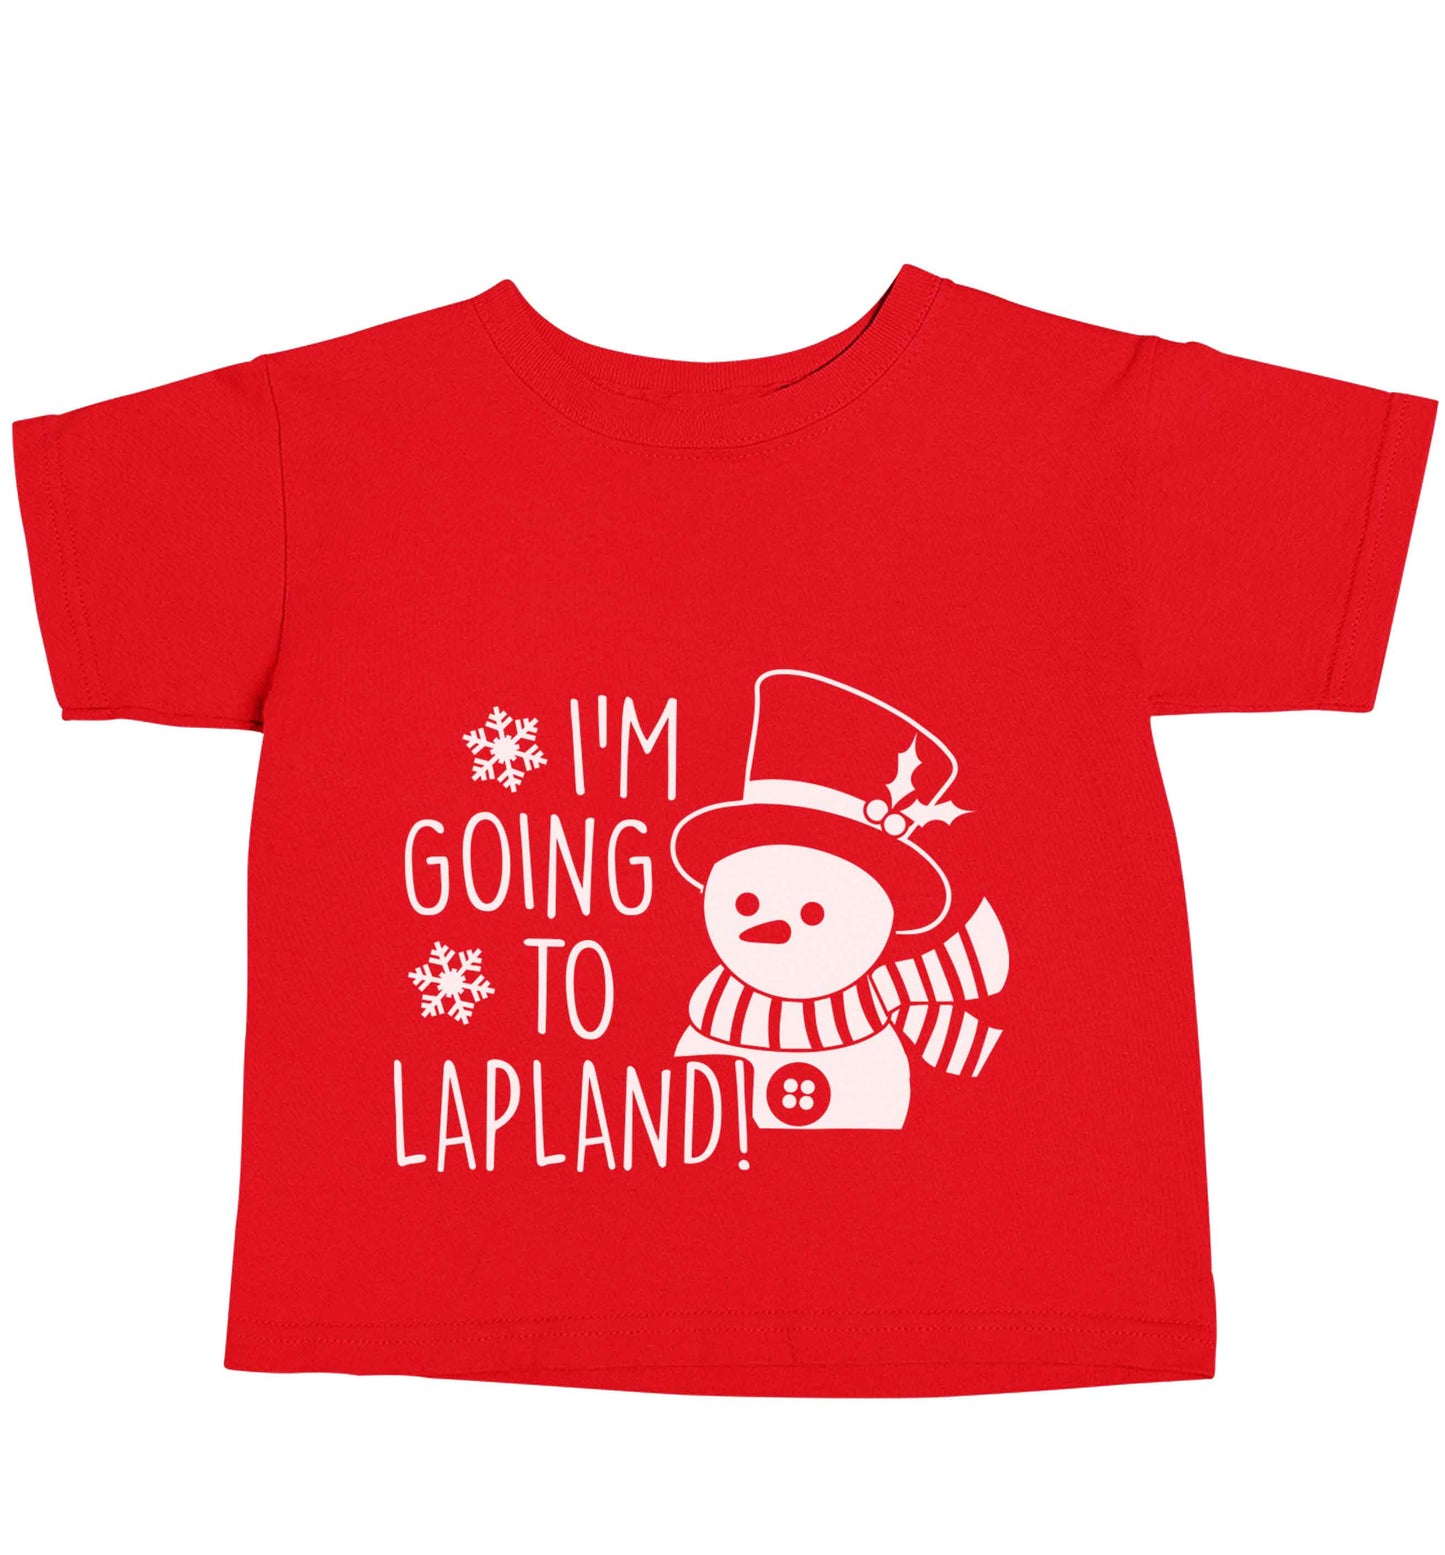 I'm going to Lapland red baby toddler Tshirt 2 Years